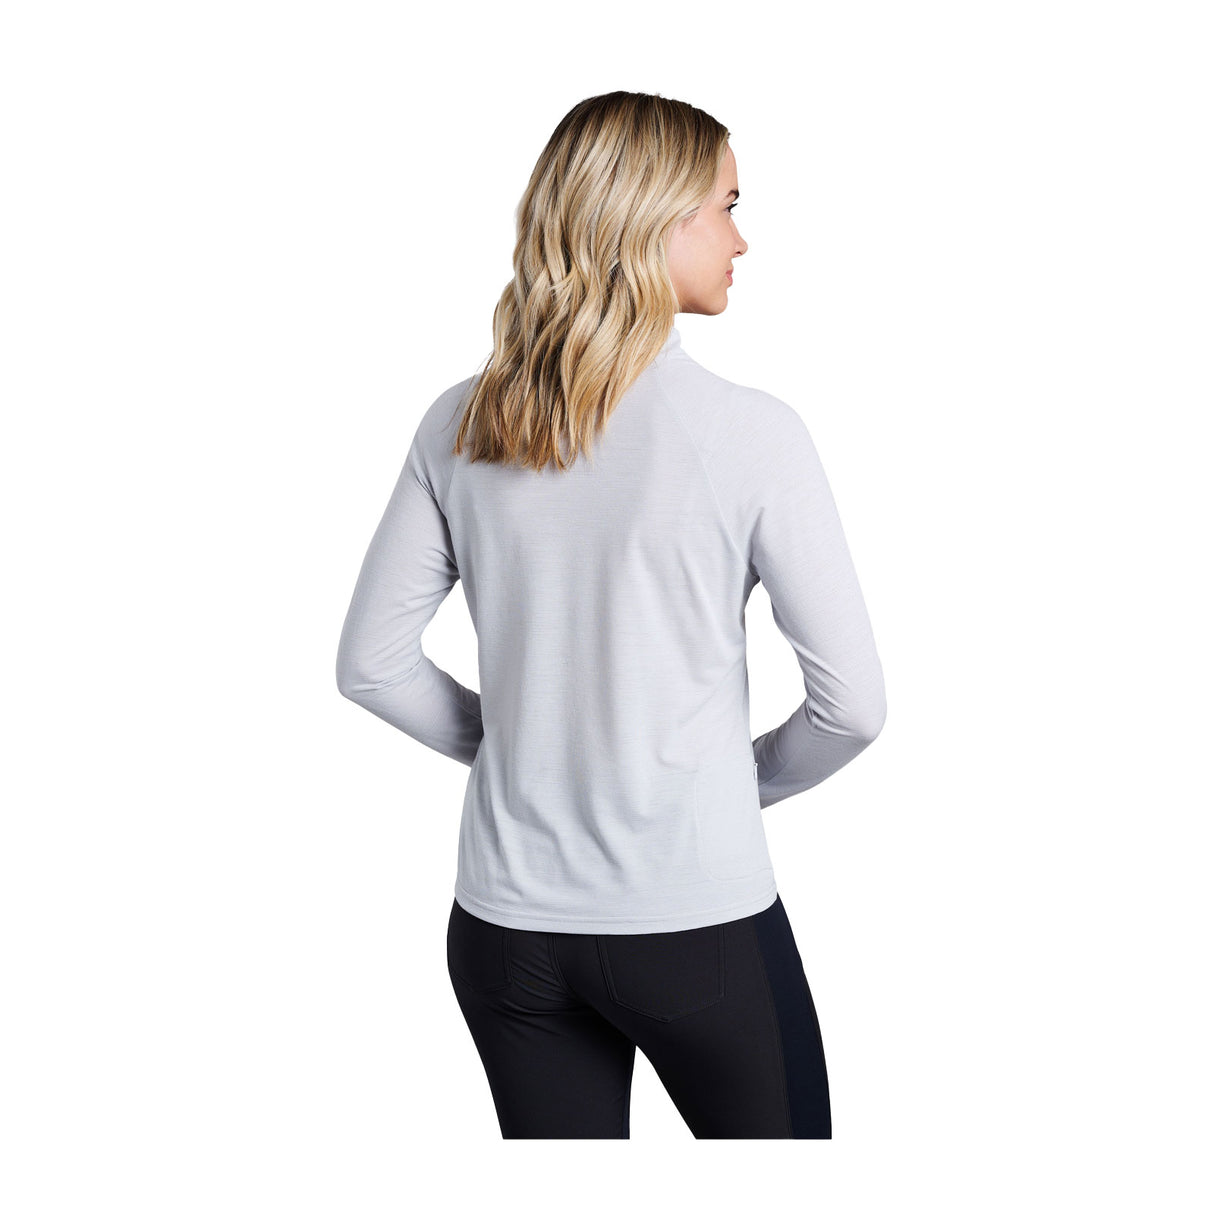 Kuhl Agility Pullover (Women) - Mist Apparel - Top - Long Sleeve - The Heel Shoe Fitters